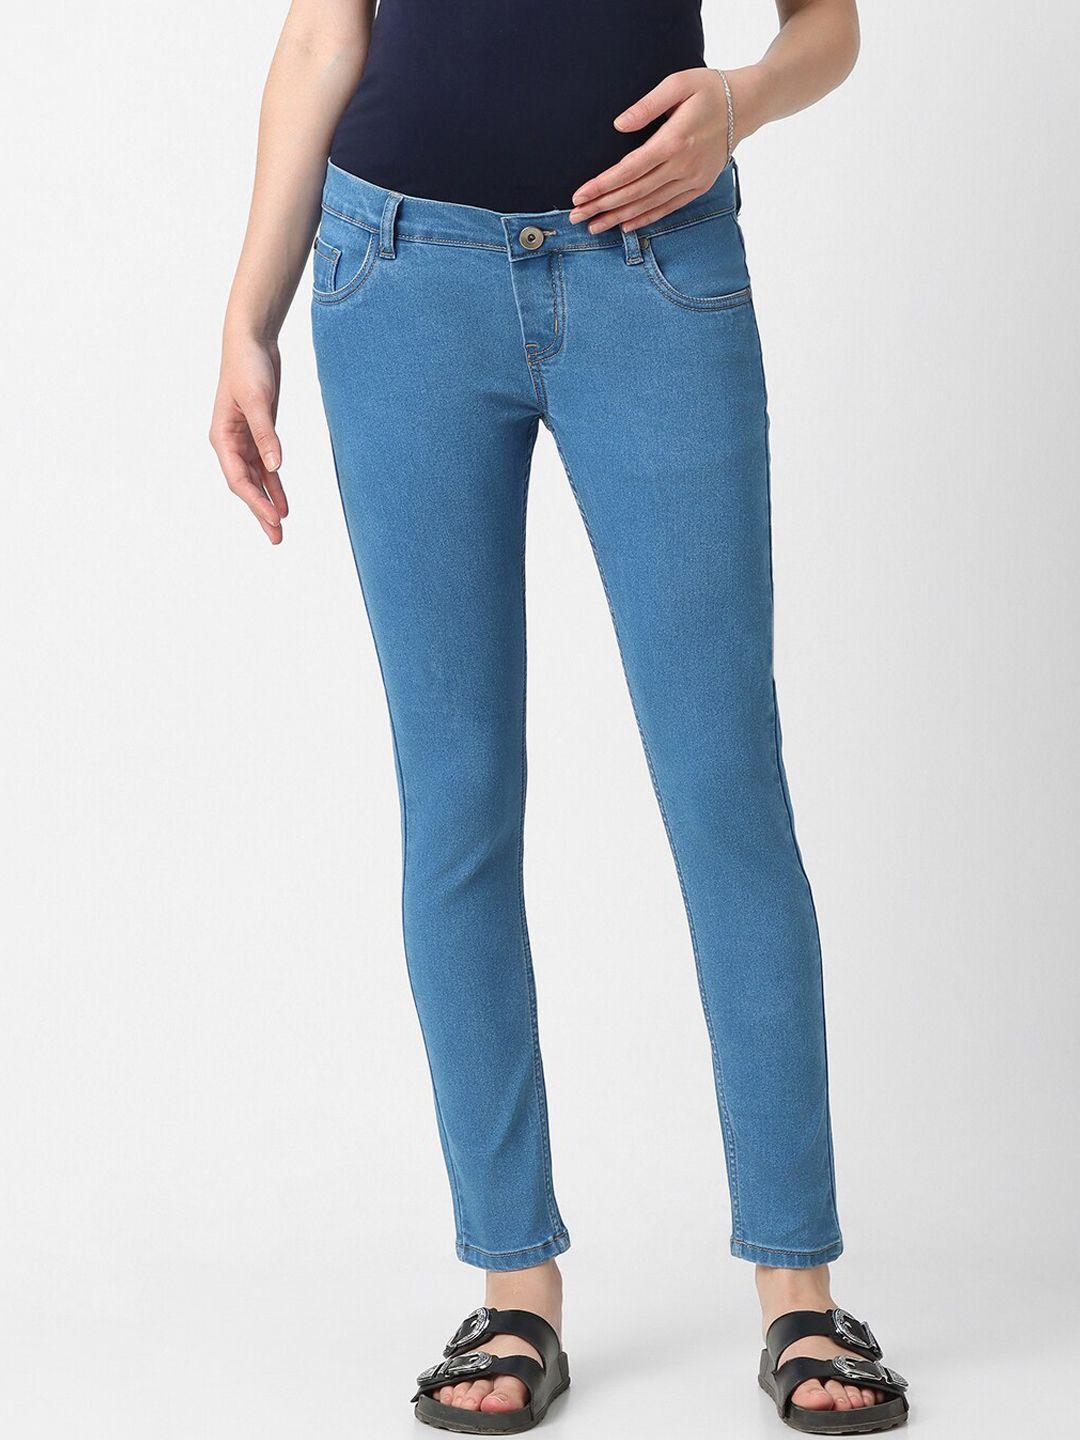 mystere-paris-women-relaxed-fit-maternity-jeans